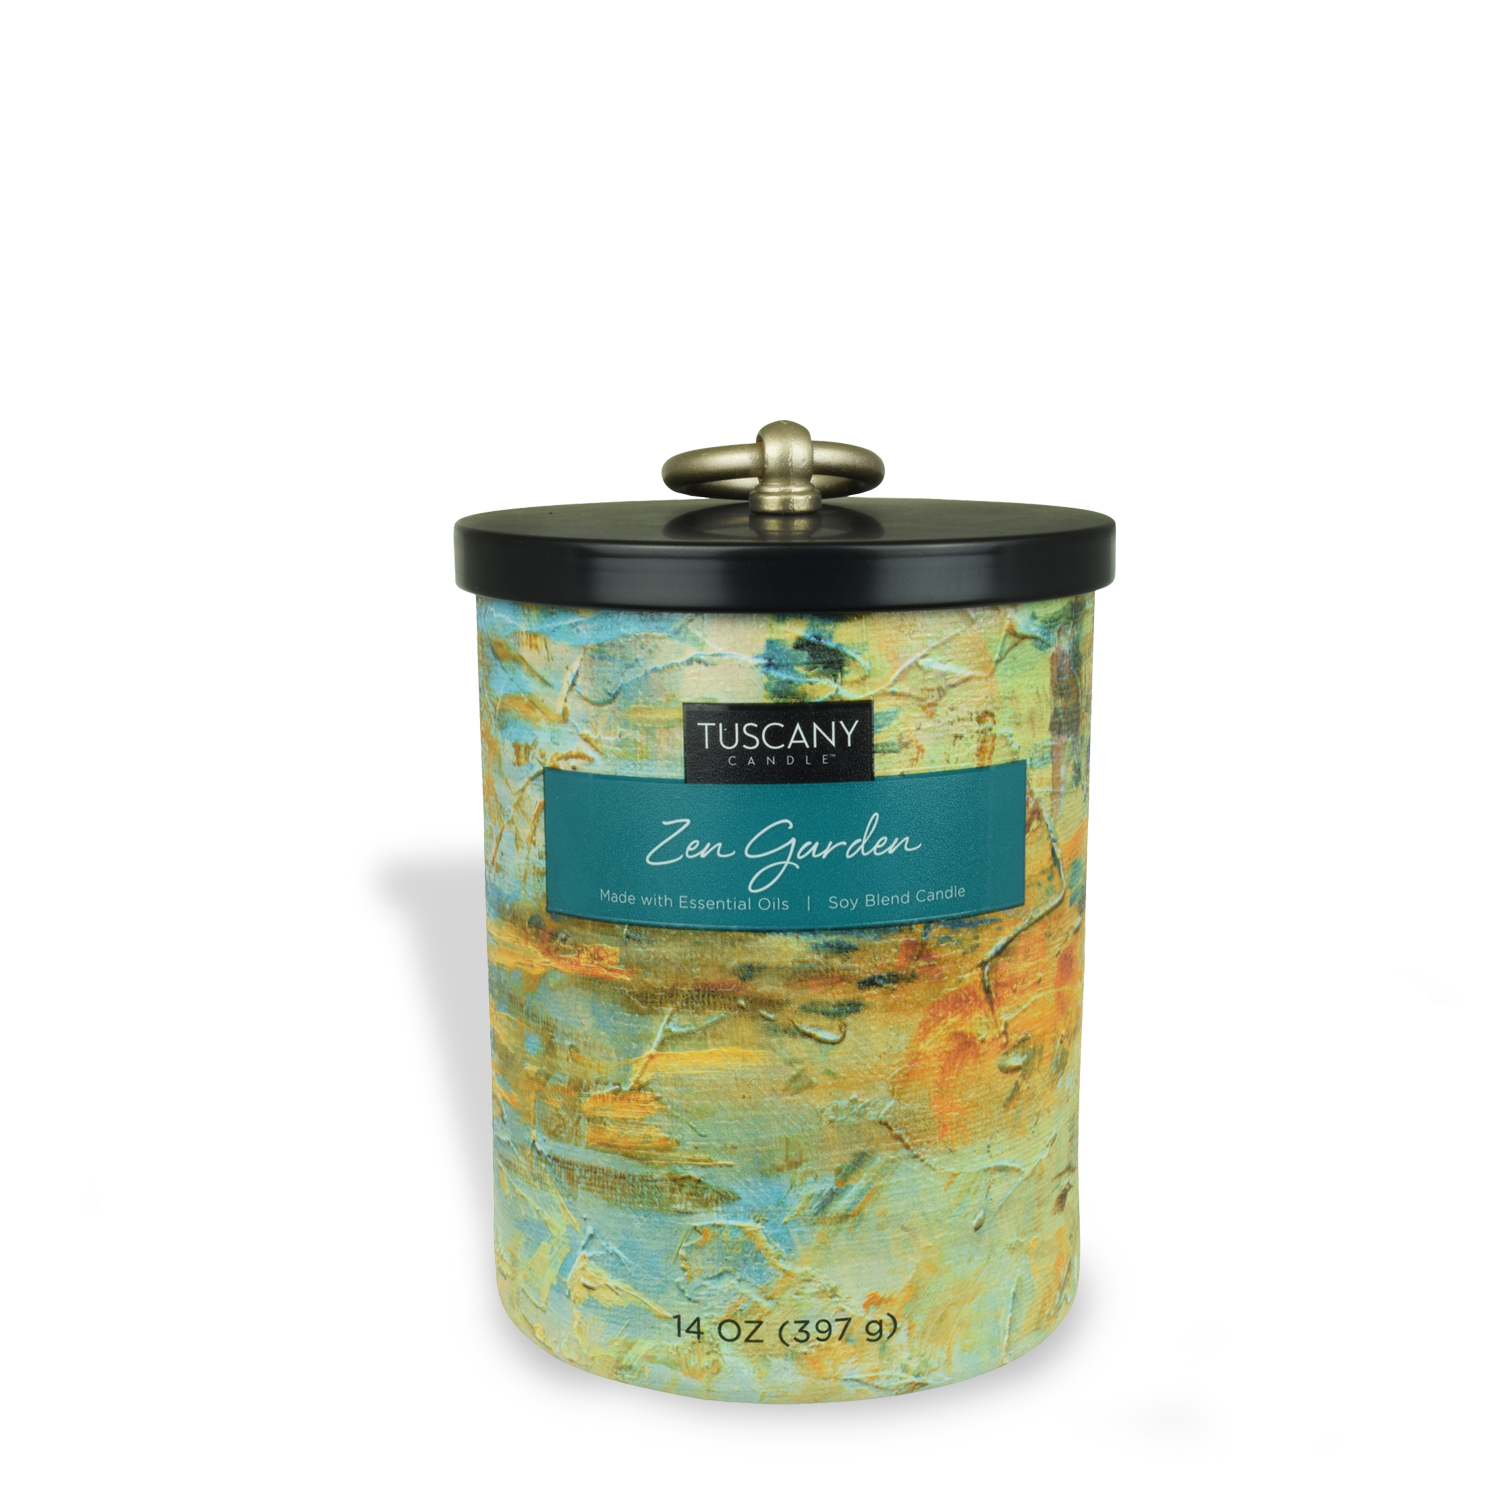 A Zen Garden scented jar candle (14 oz) in a tin, featuring the refreshing scents of Eucalyptus, Water Lotus, and Spearmint from Tuscany Candle.